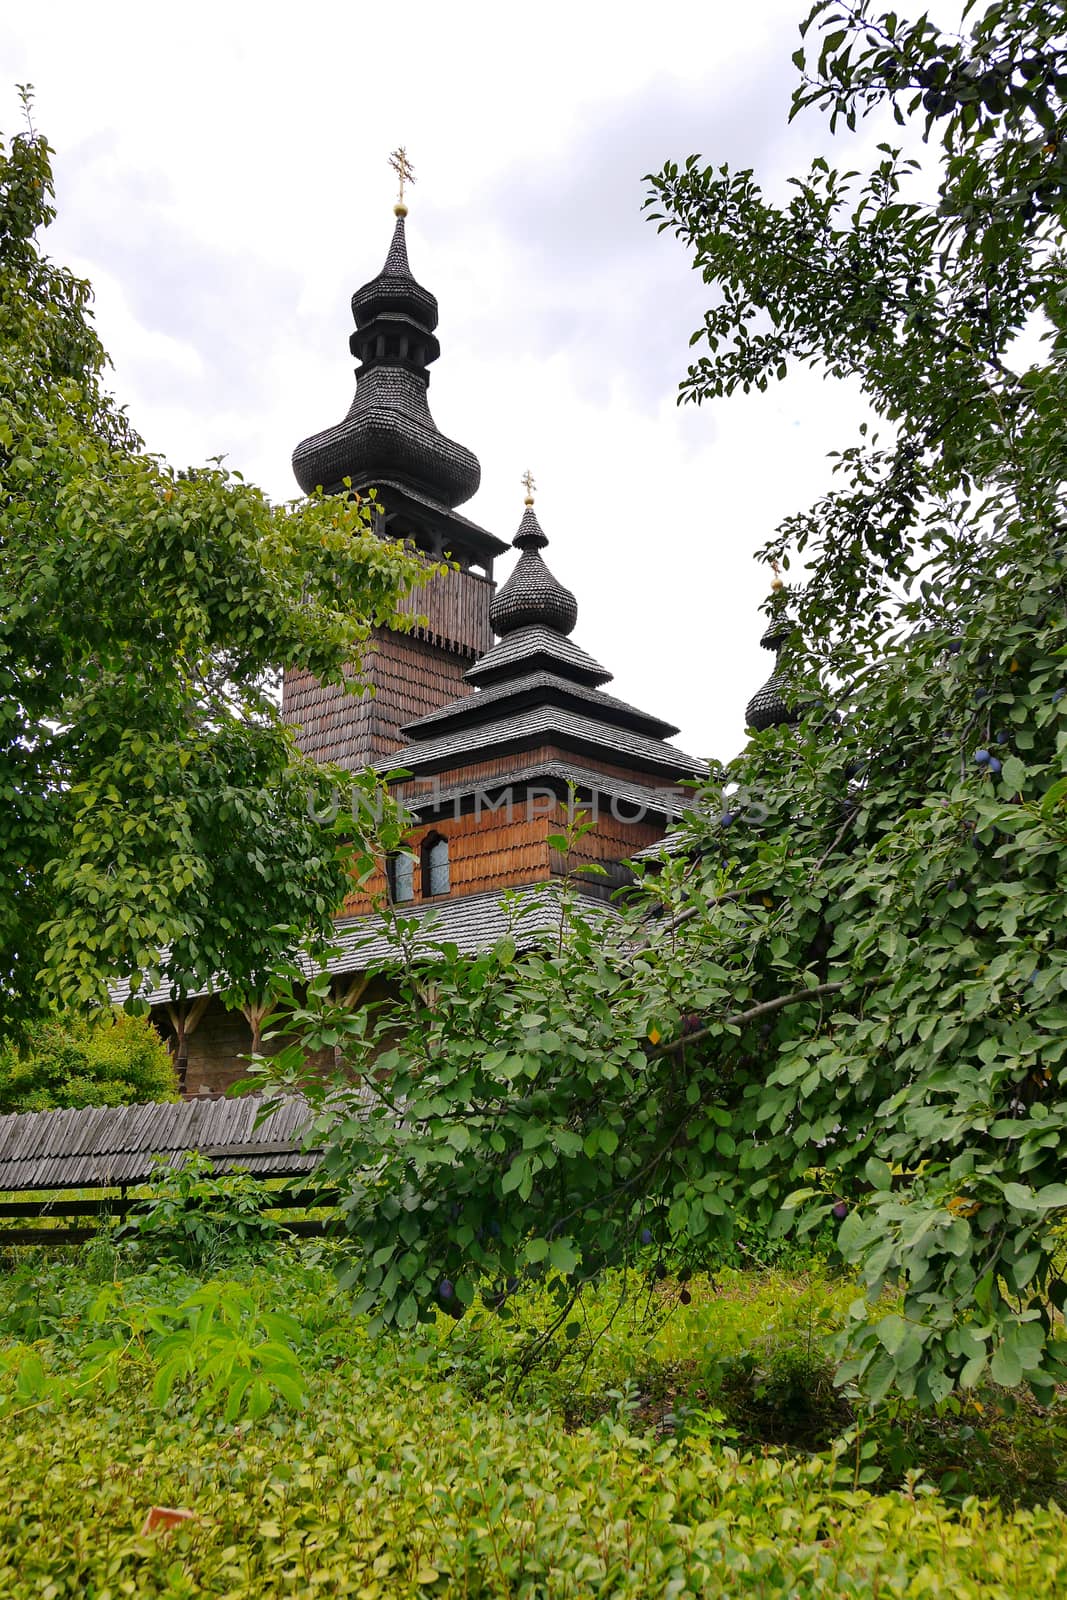 A wooden church with black domes hid behind tall, dense trees by Adamchuk